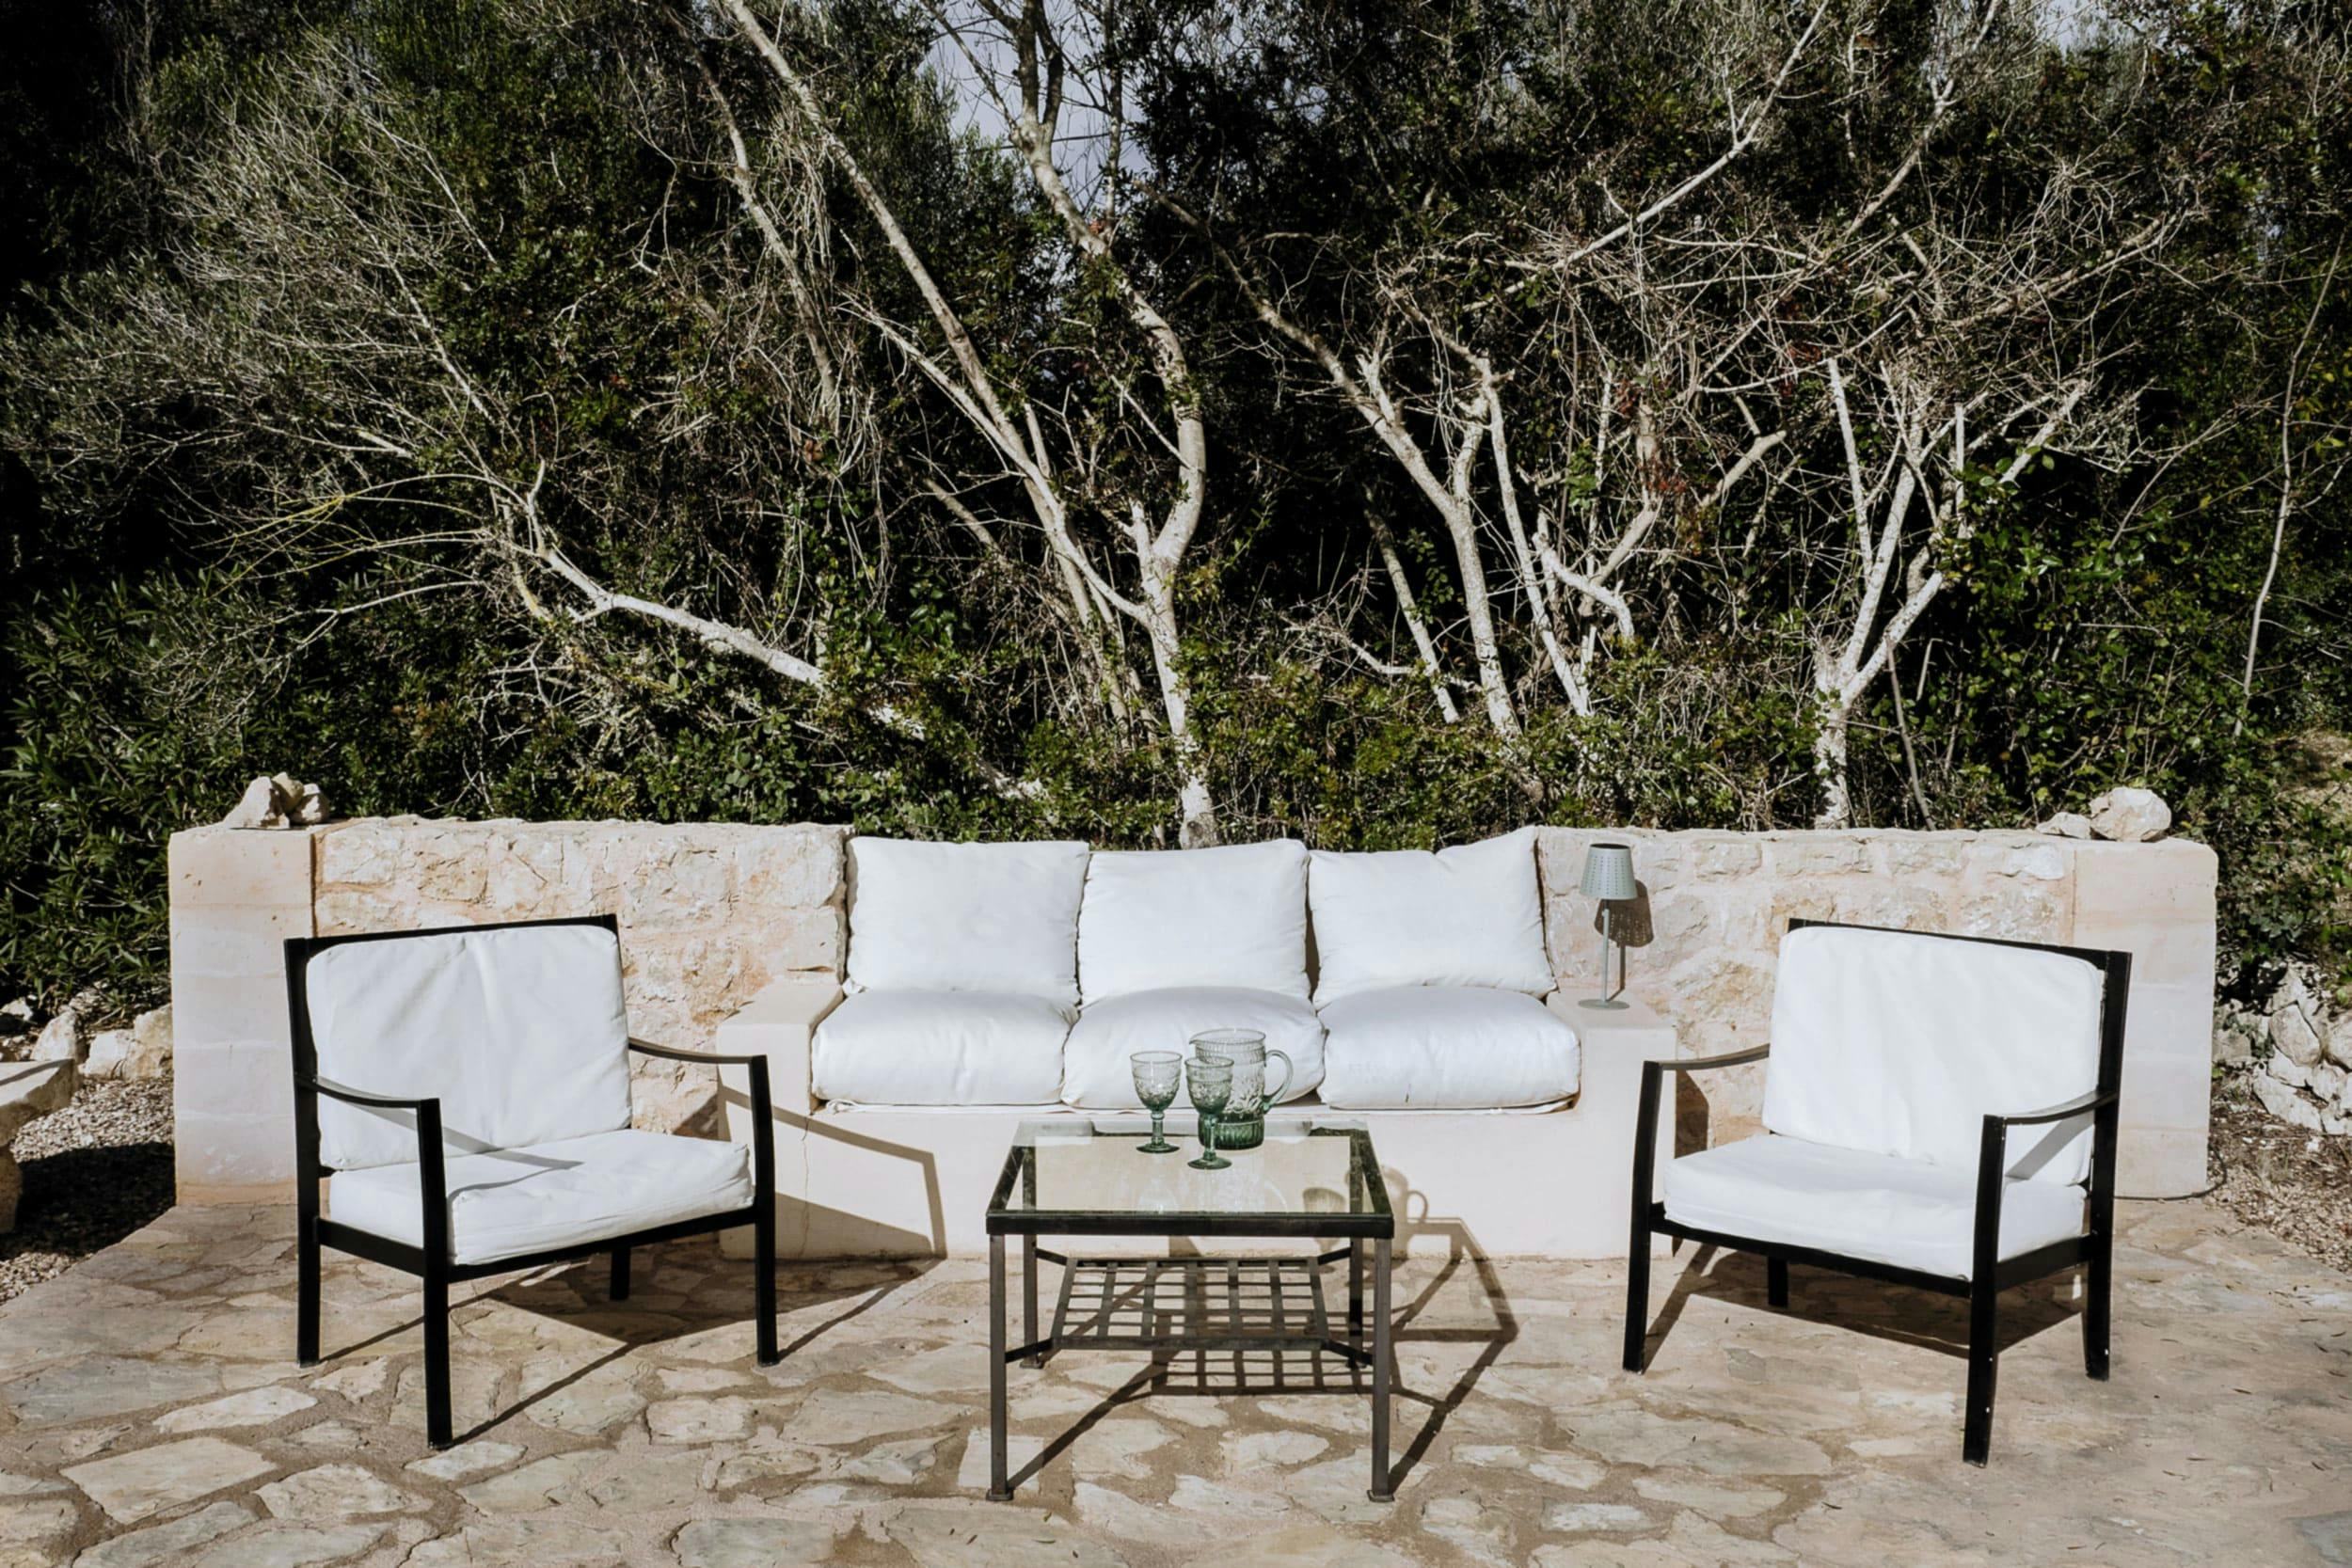 The image features a patio with two white chairs and a table, creating a cozy outdoor seating area. The chairs are placed close to each other, and the table is situated between them. There are also two potted plants, one on the left side and another on the right side of the table, adding a touch of greenery to the scene.